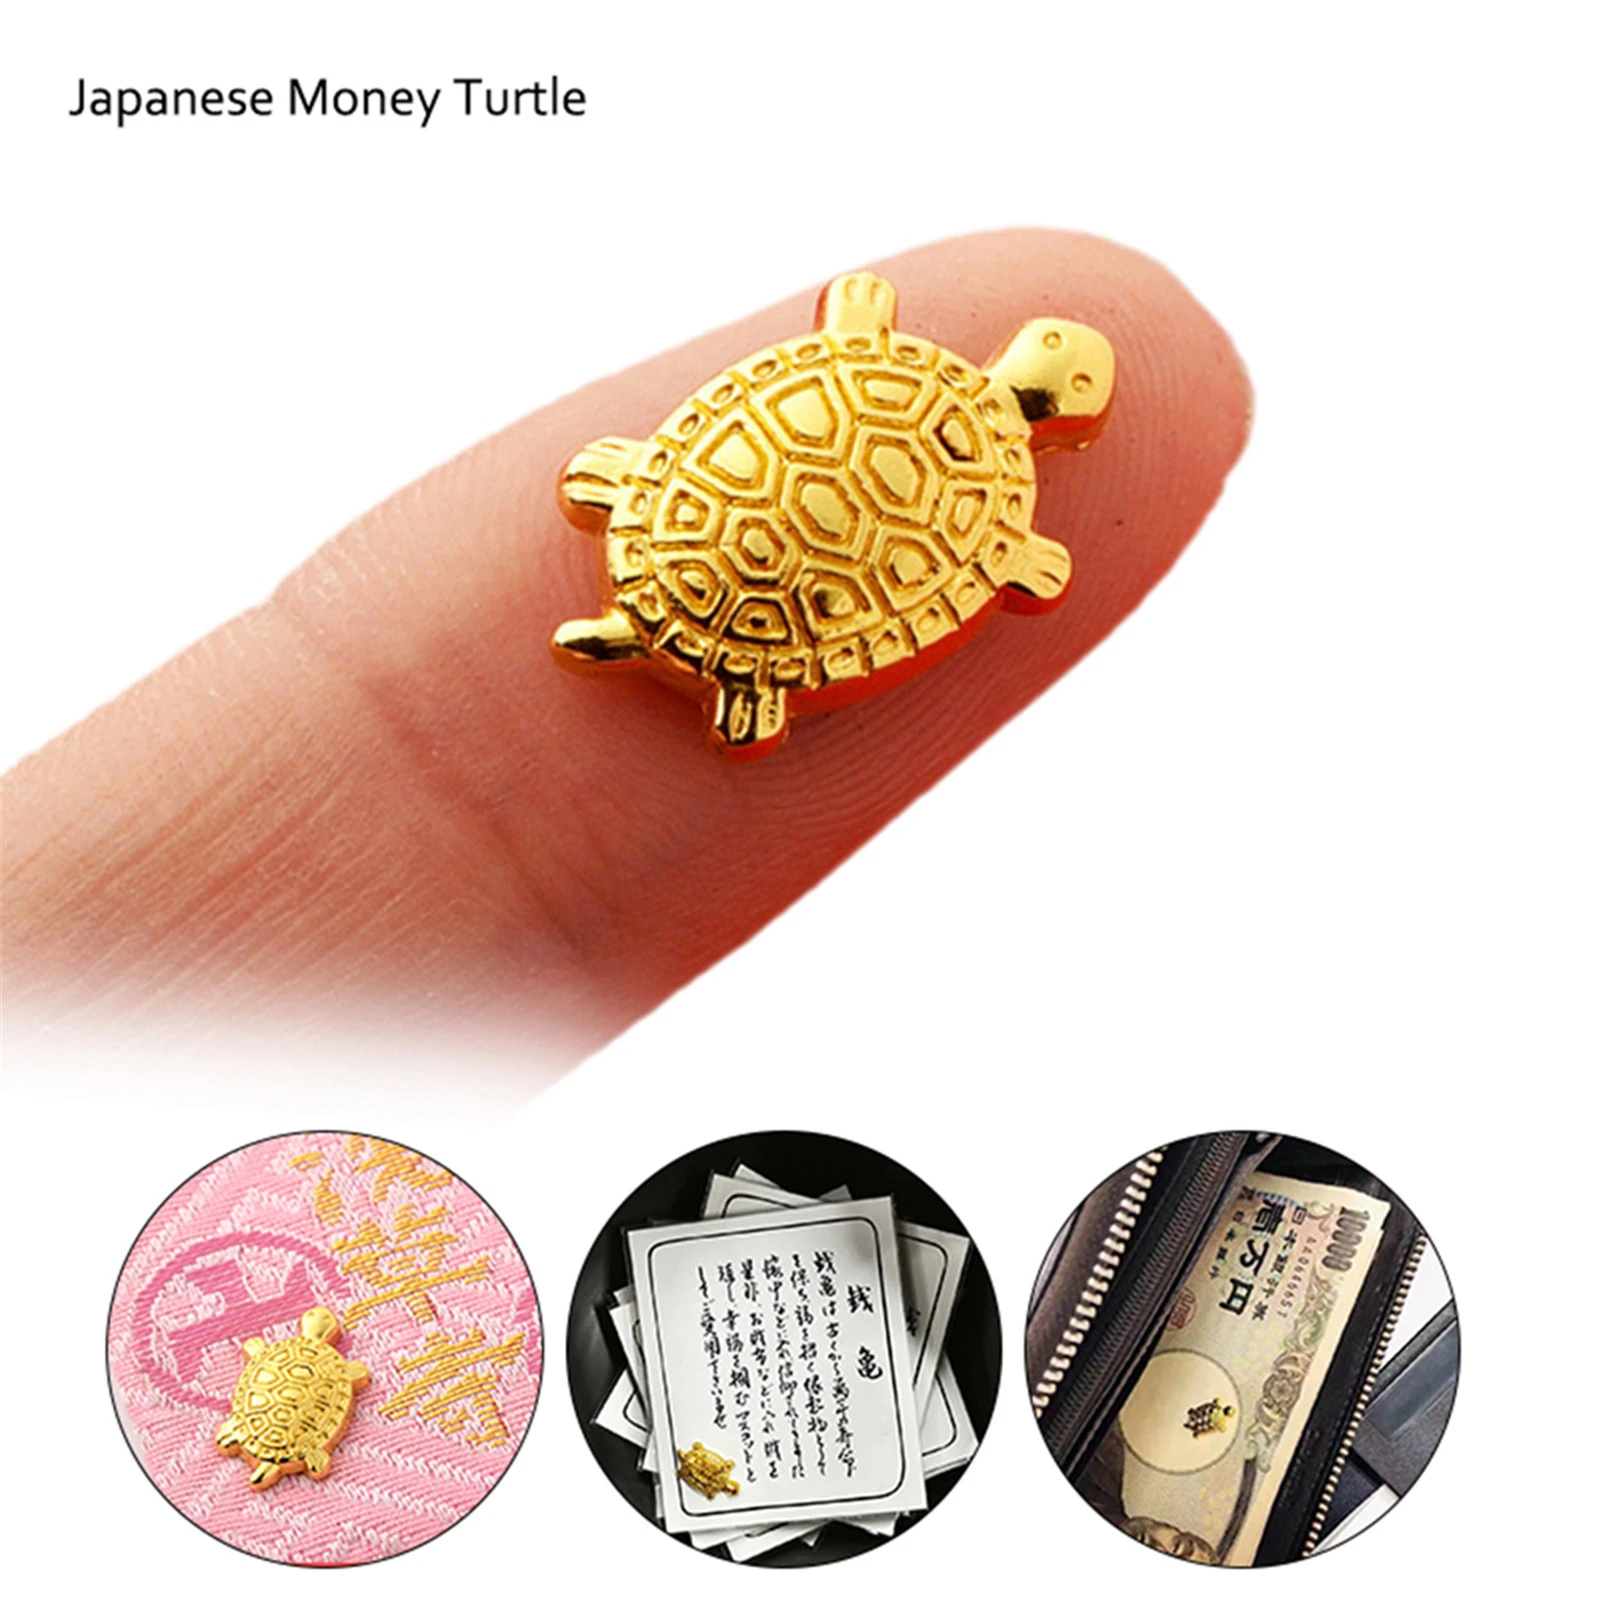 Japanese Money Turtle Asakusa Temple Small Golden Tortoise Guarding Praying Lucky Wealth Home Decoration Lucky Gift